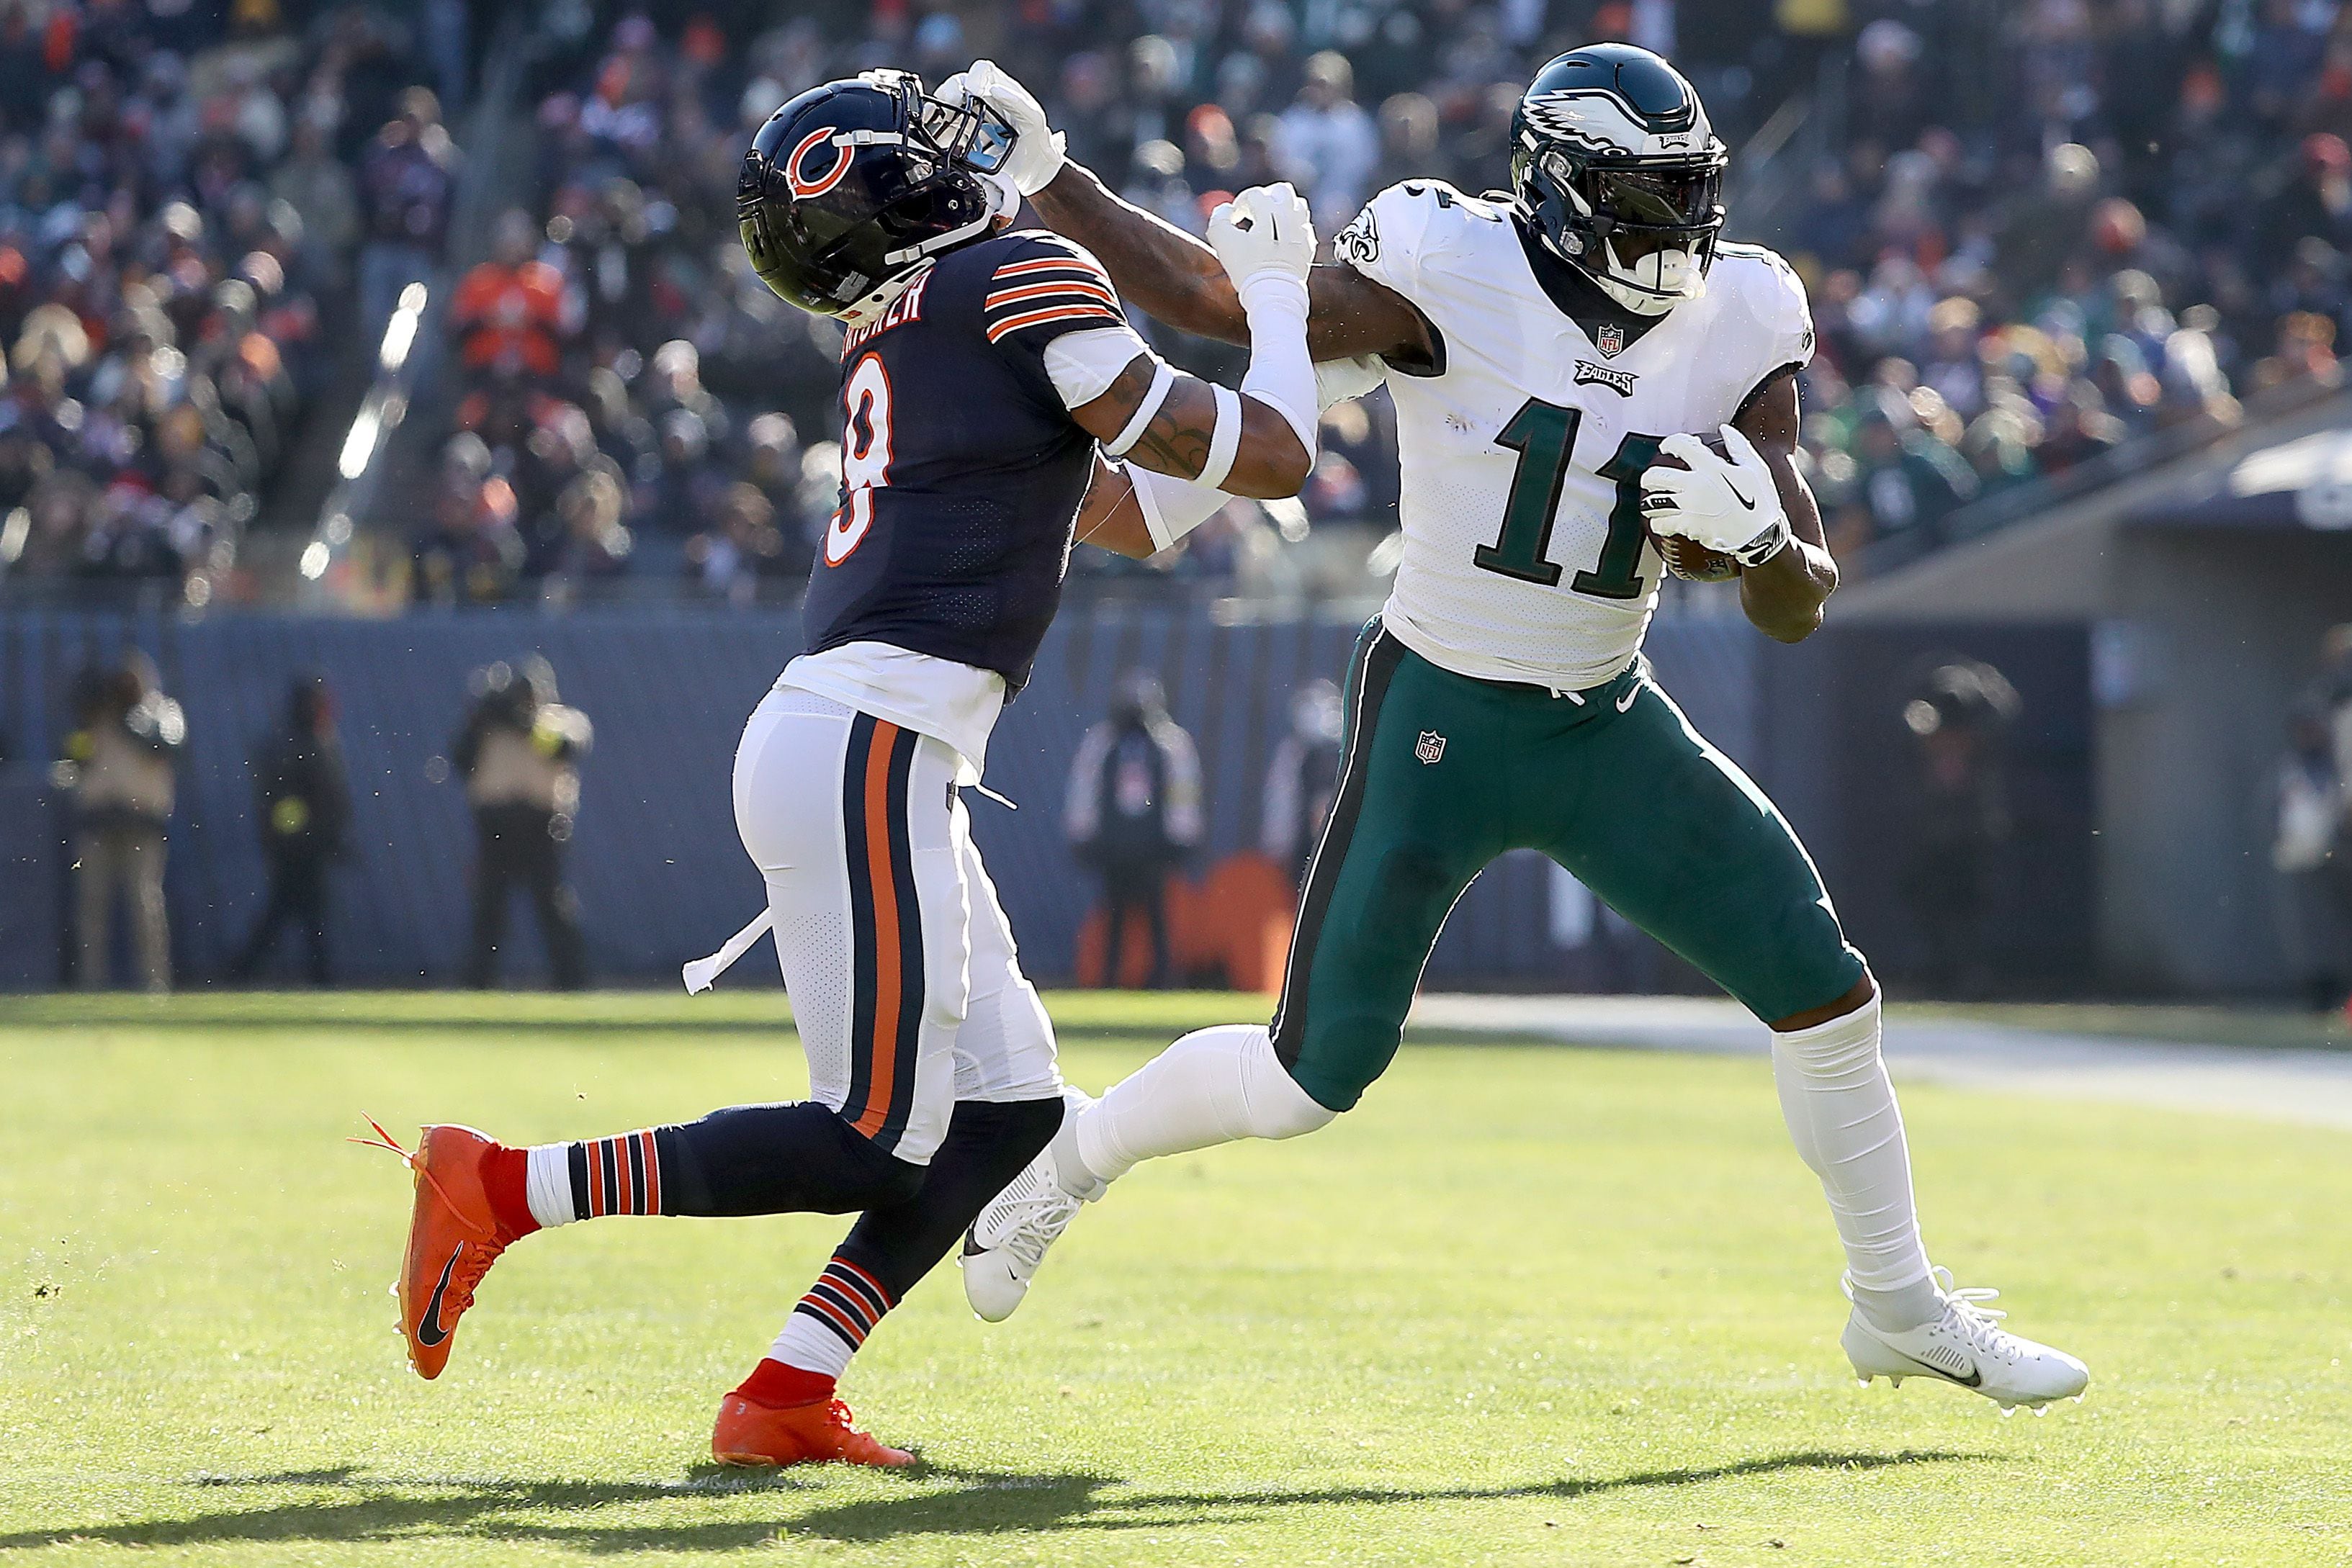 Hurts runs for 3 TDs as Eagles squeeze by Bears 25-20 - WHYY